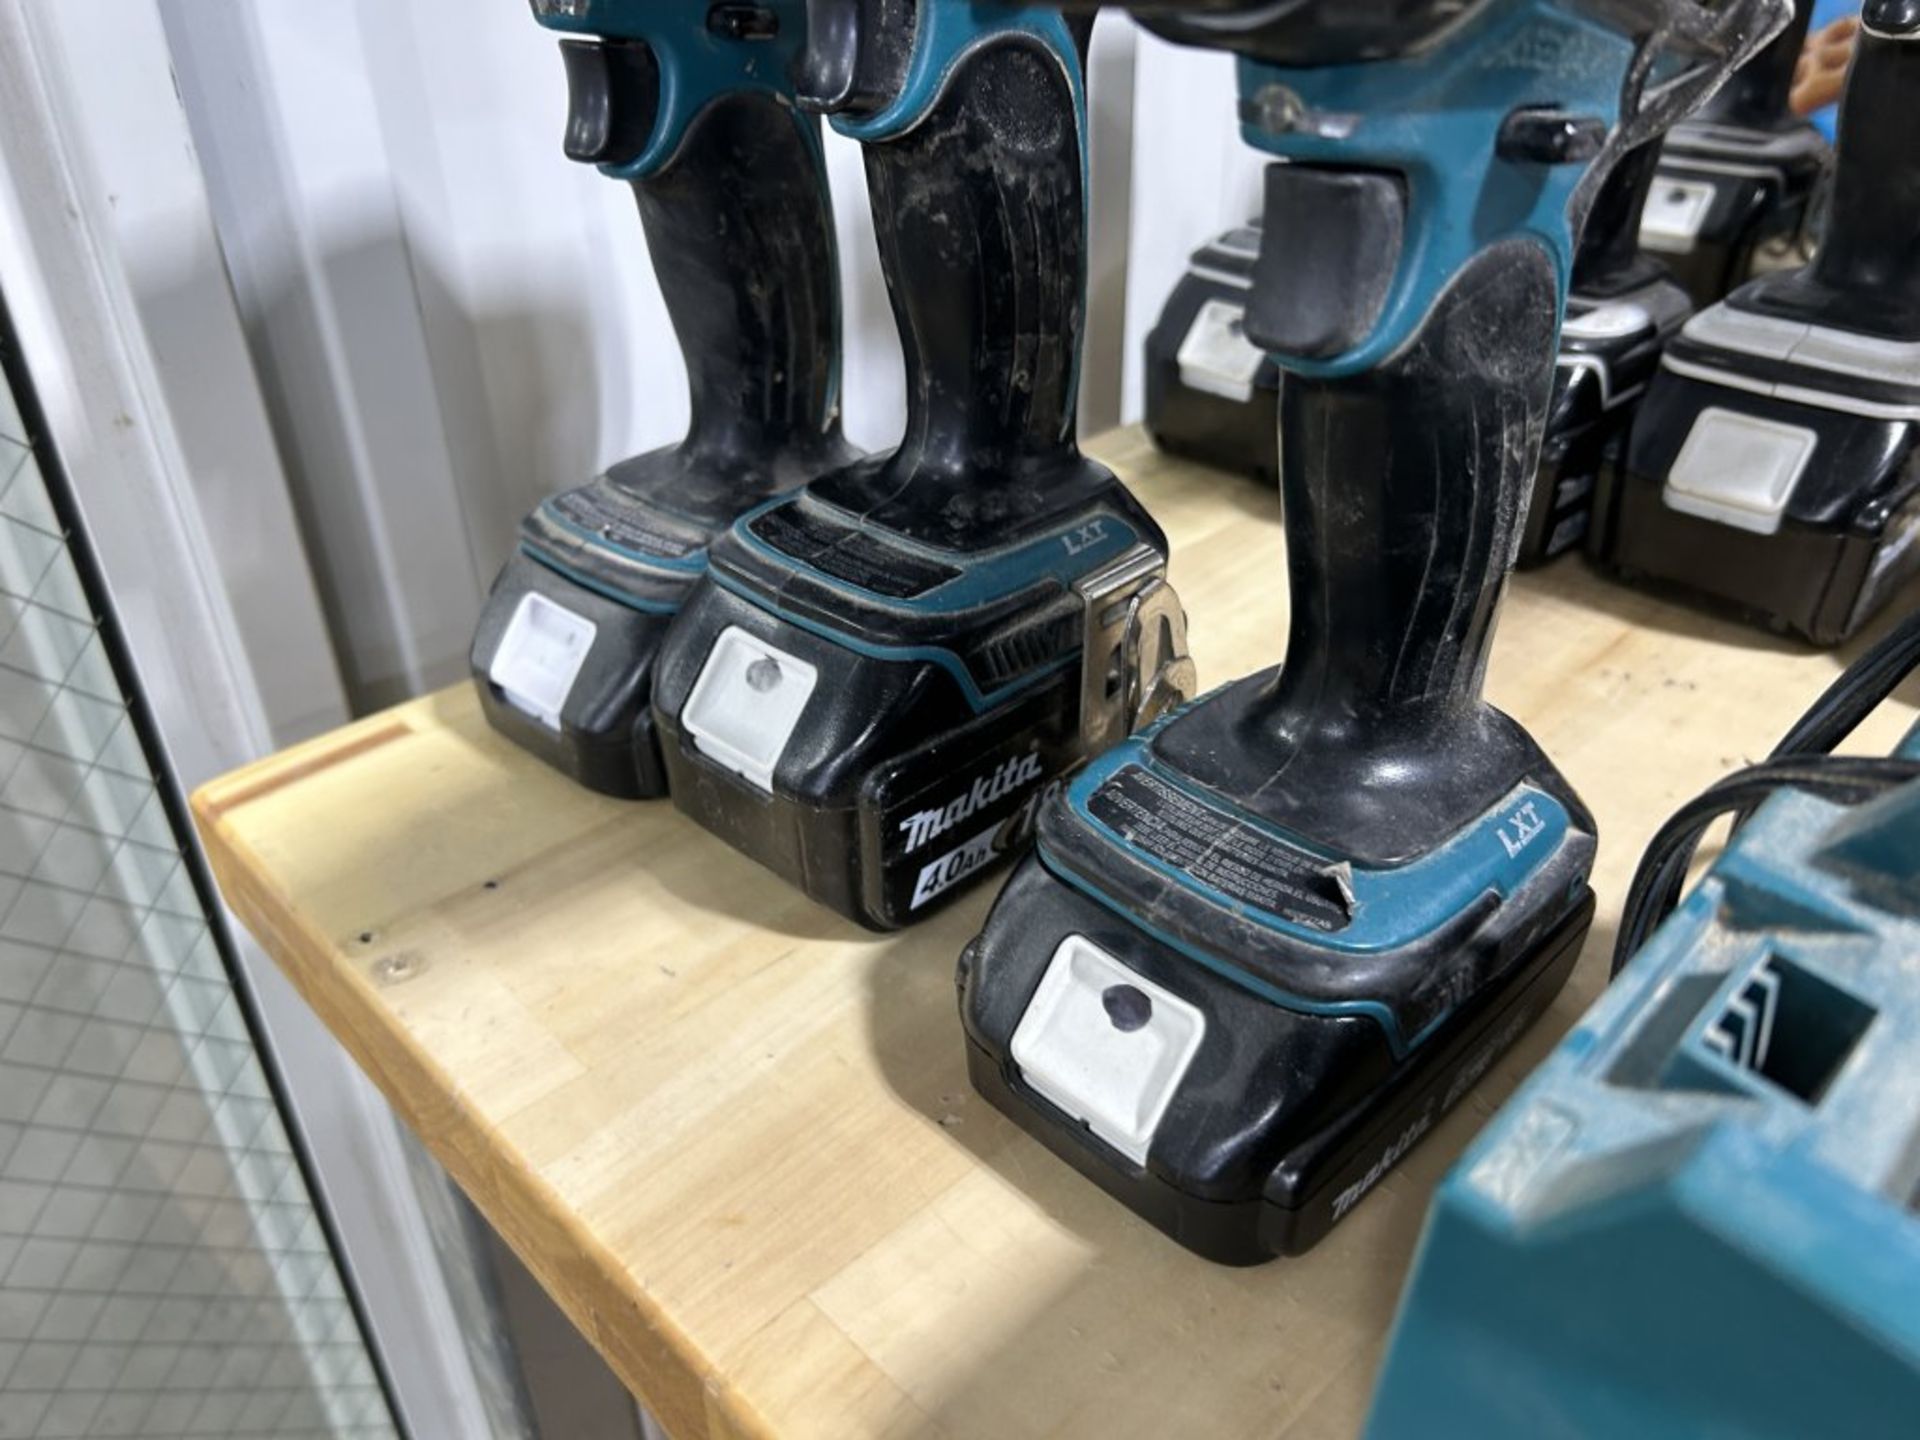 (3) MAKITA 18V CORDLESS DRILLS WITH BATTERIES AND CHARGER - Image 4 of 4